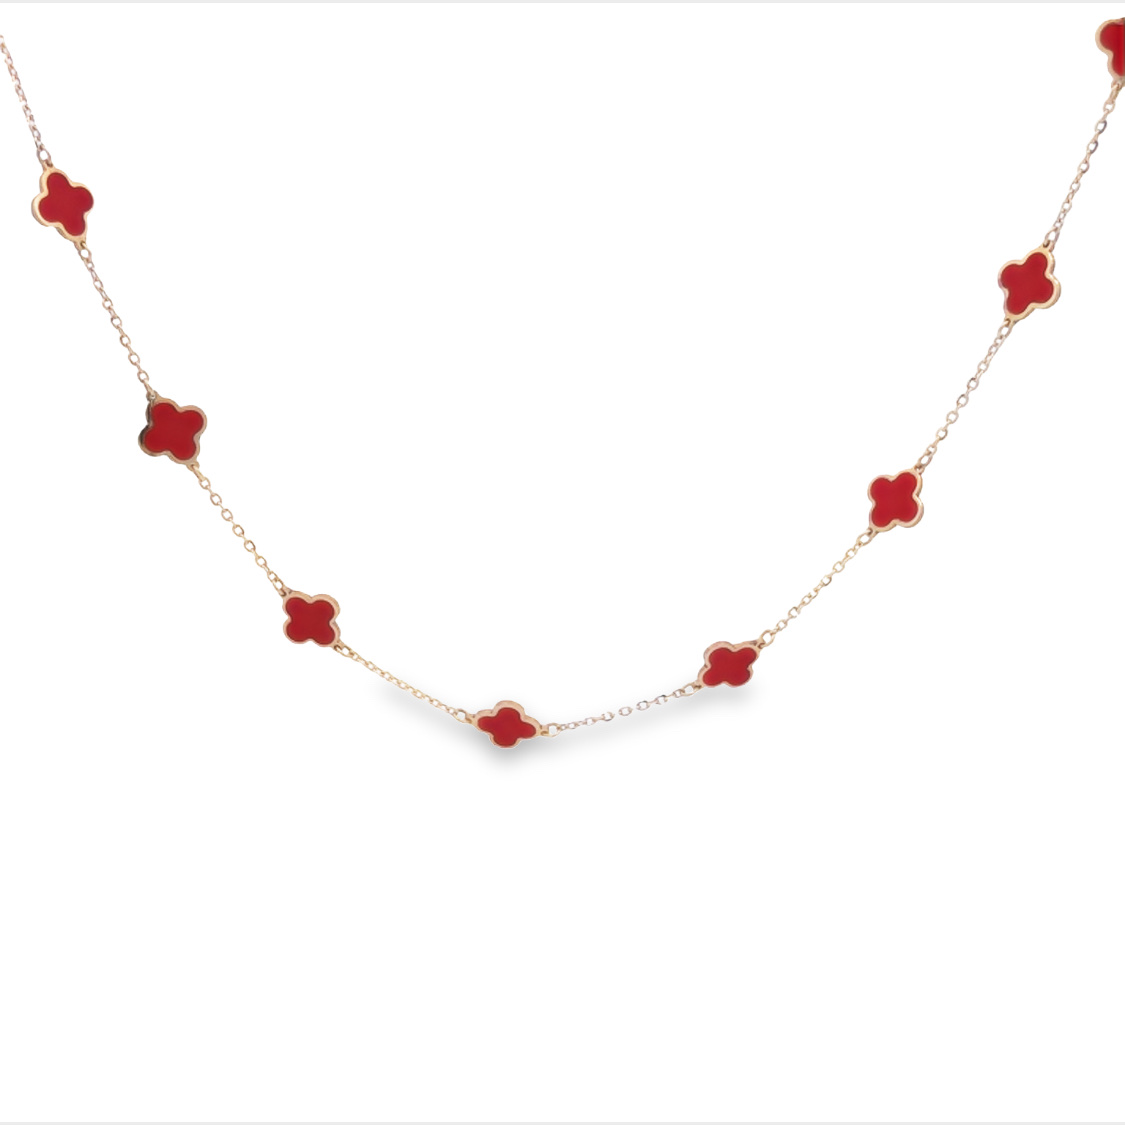 24K Yellow Gold Carnelian Station Necklace 18